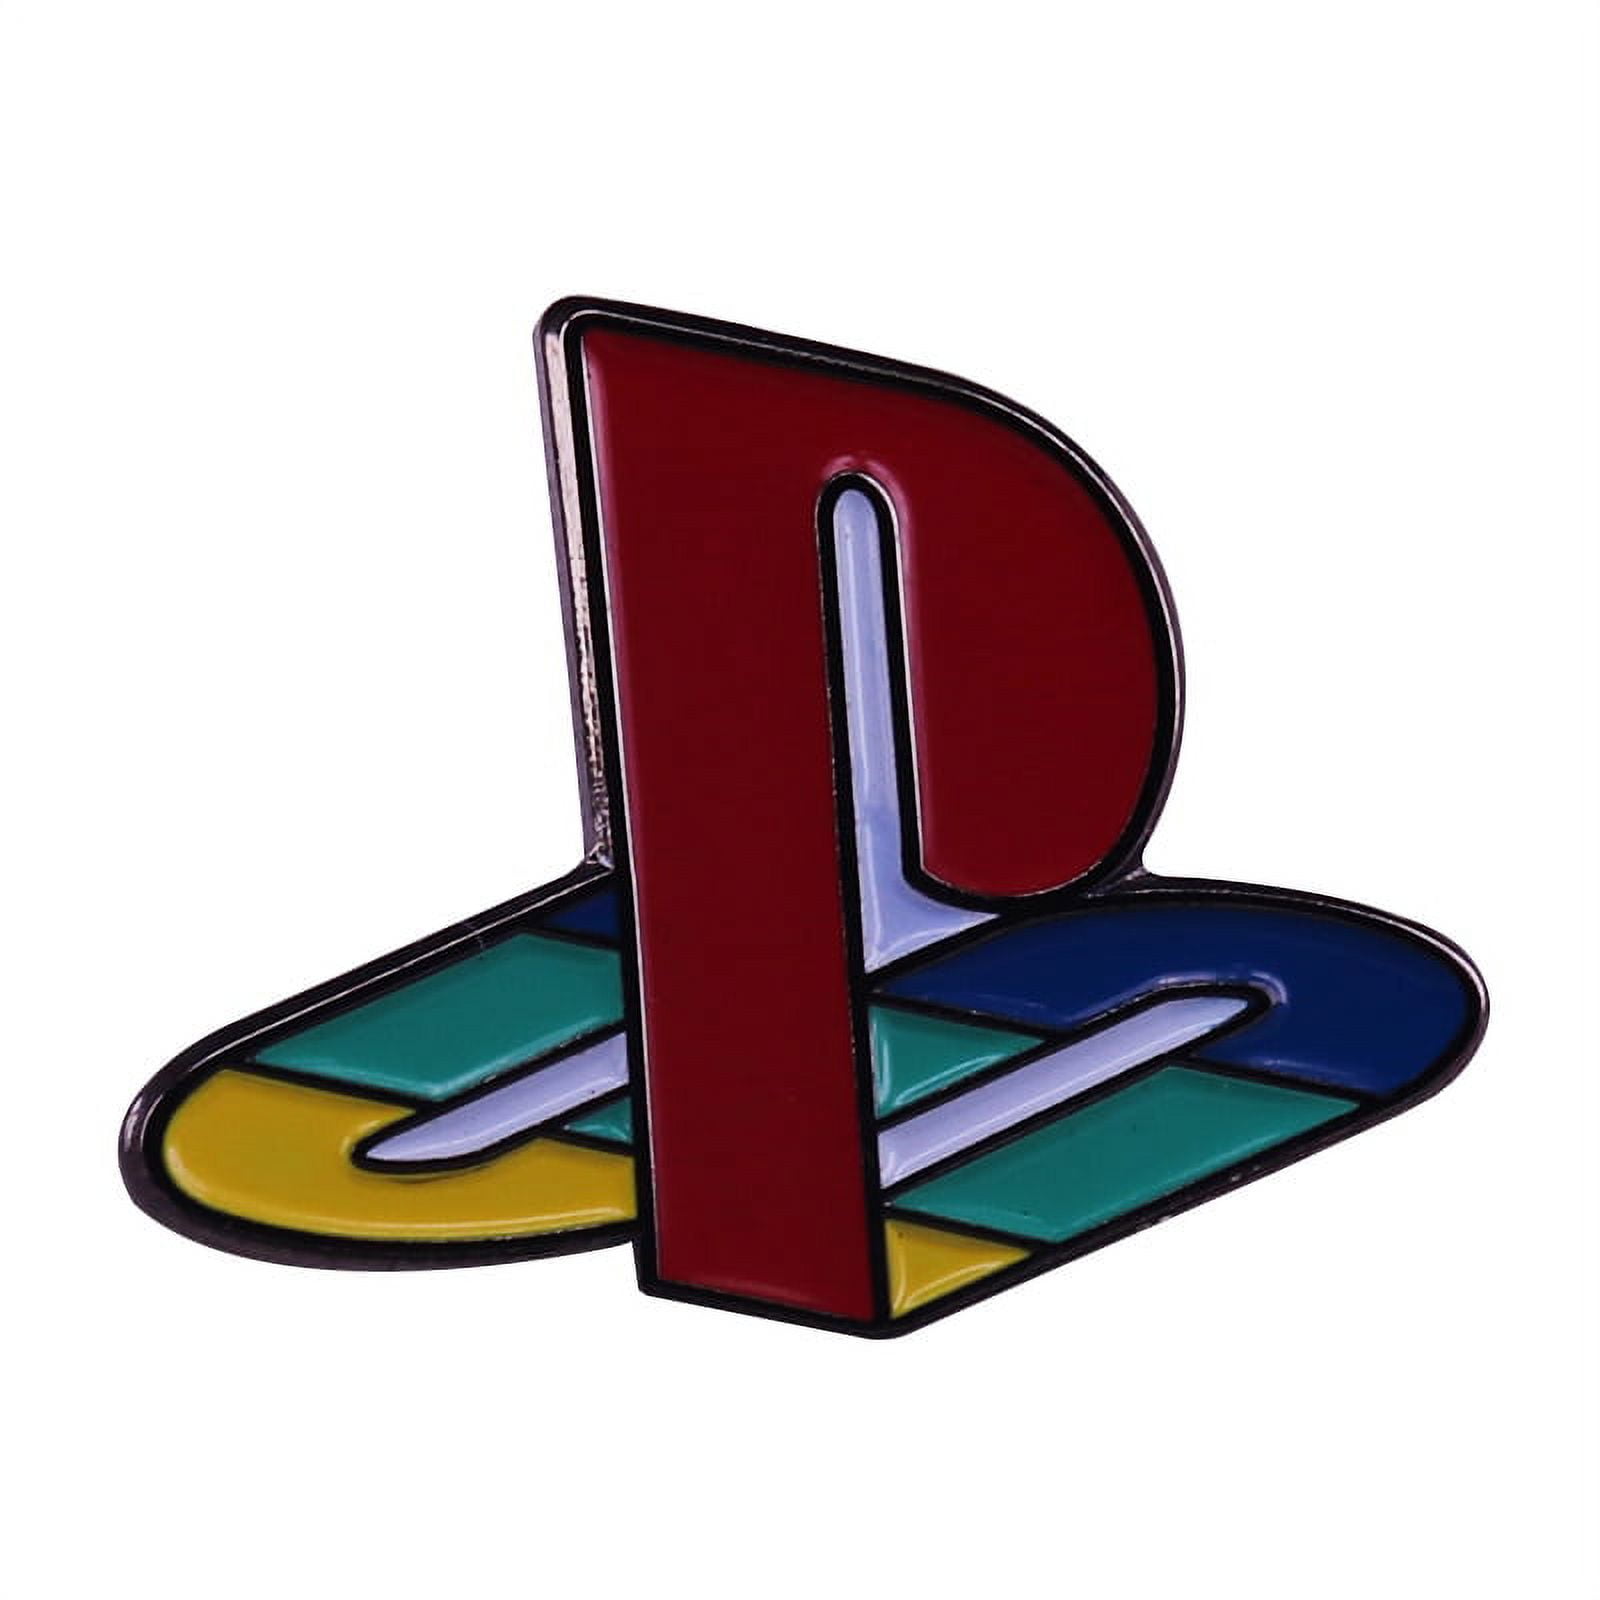 Pin on VideoGames